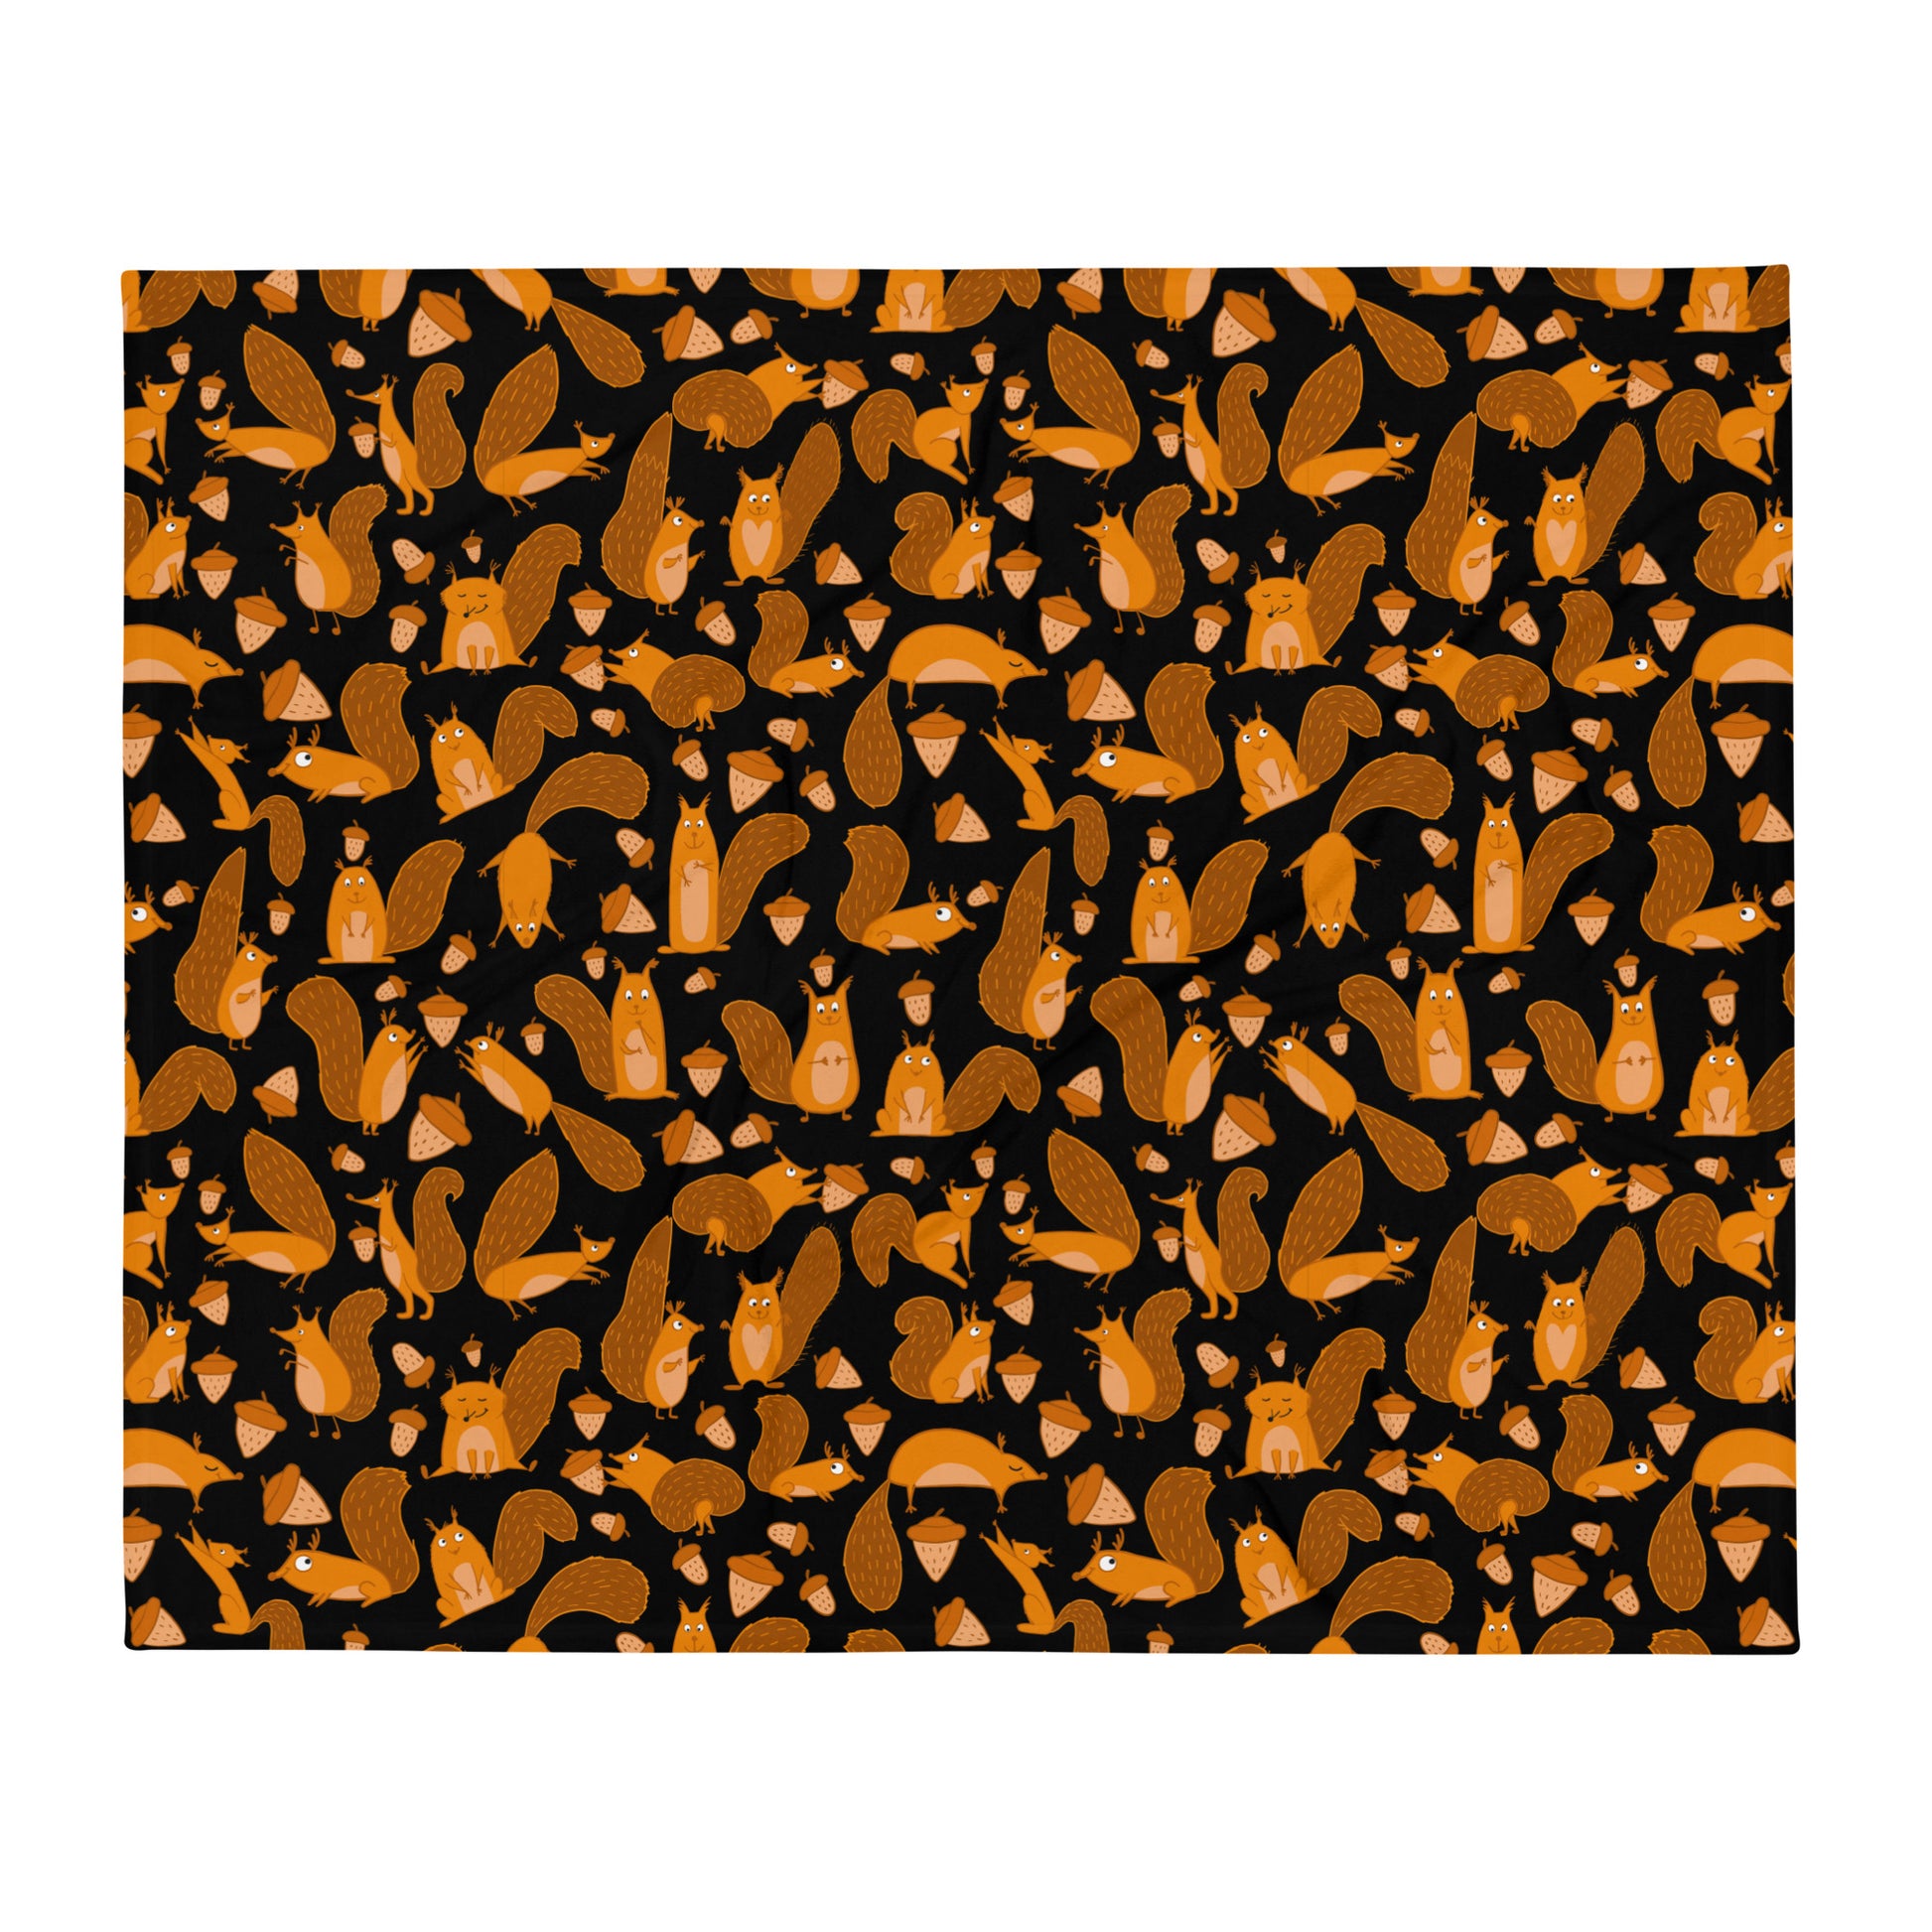 Throw blanket black color with funny orange squirrels and nuts